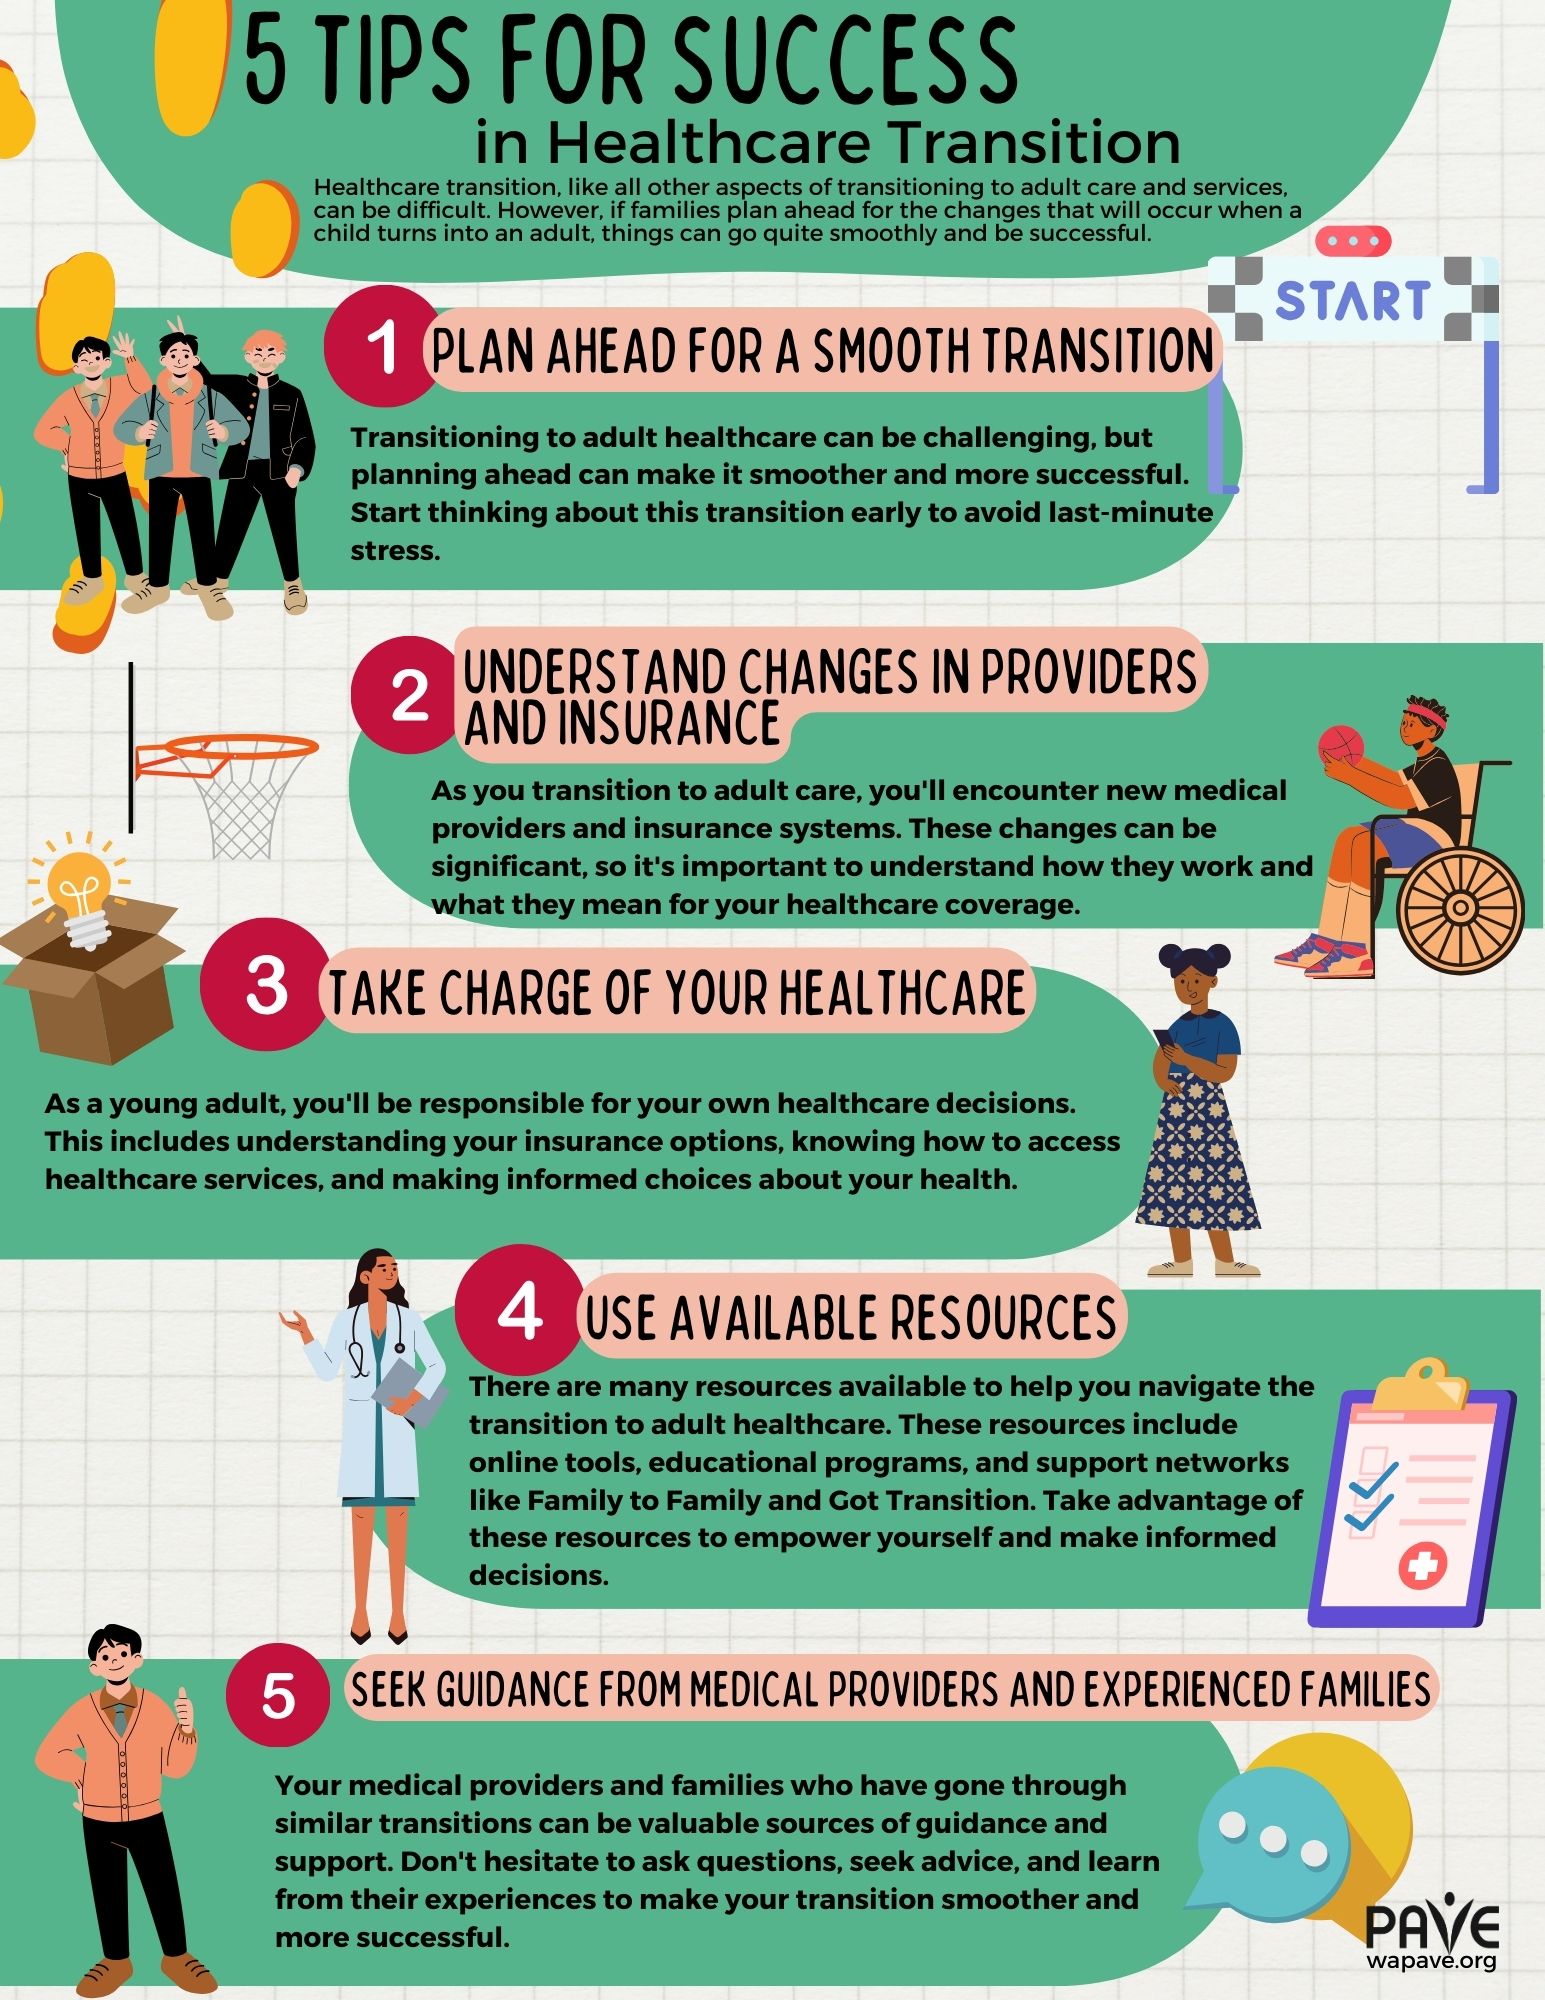 5 Tips for Success in Healthcare Transition